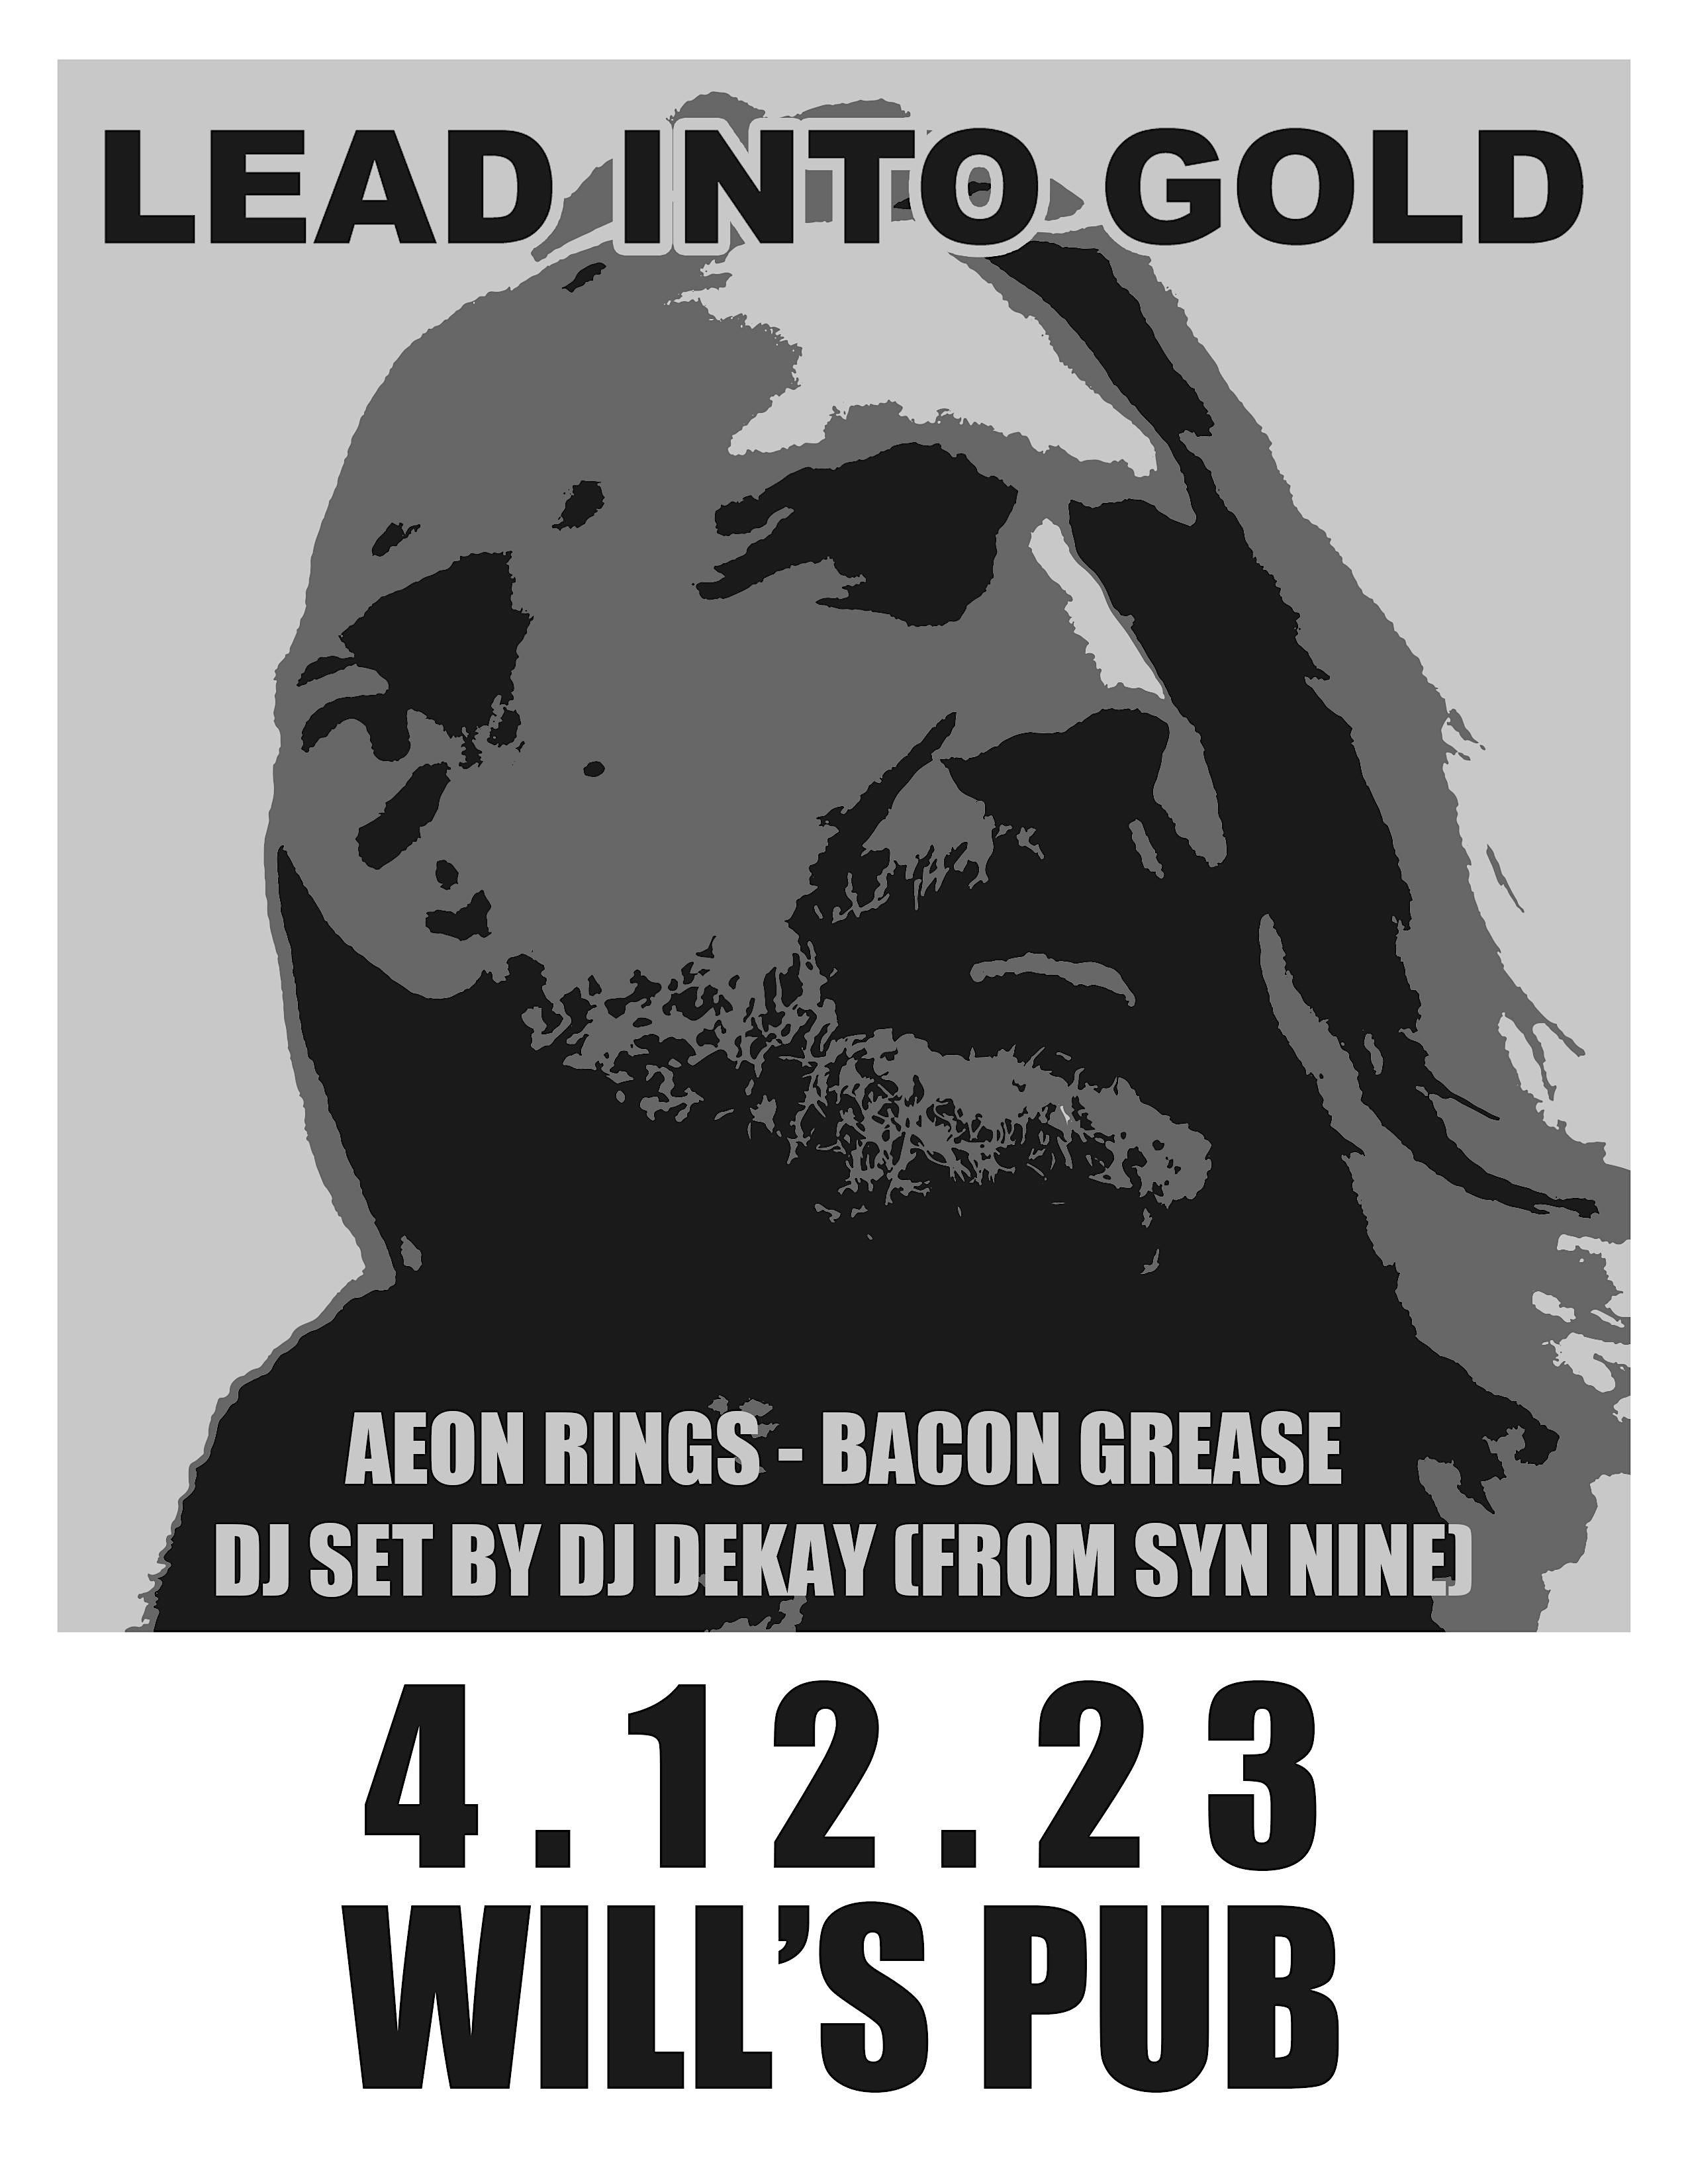 Lead Into Gold, Aeon Rings, and Bacon Grease in Orlando at Will's Pub.

DJ Set by DJ DEKAY (from Syn Nine)